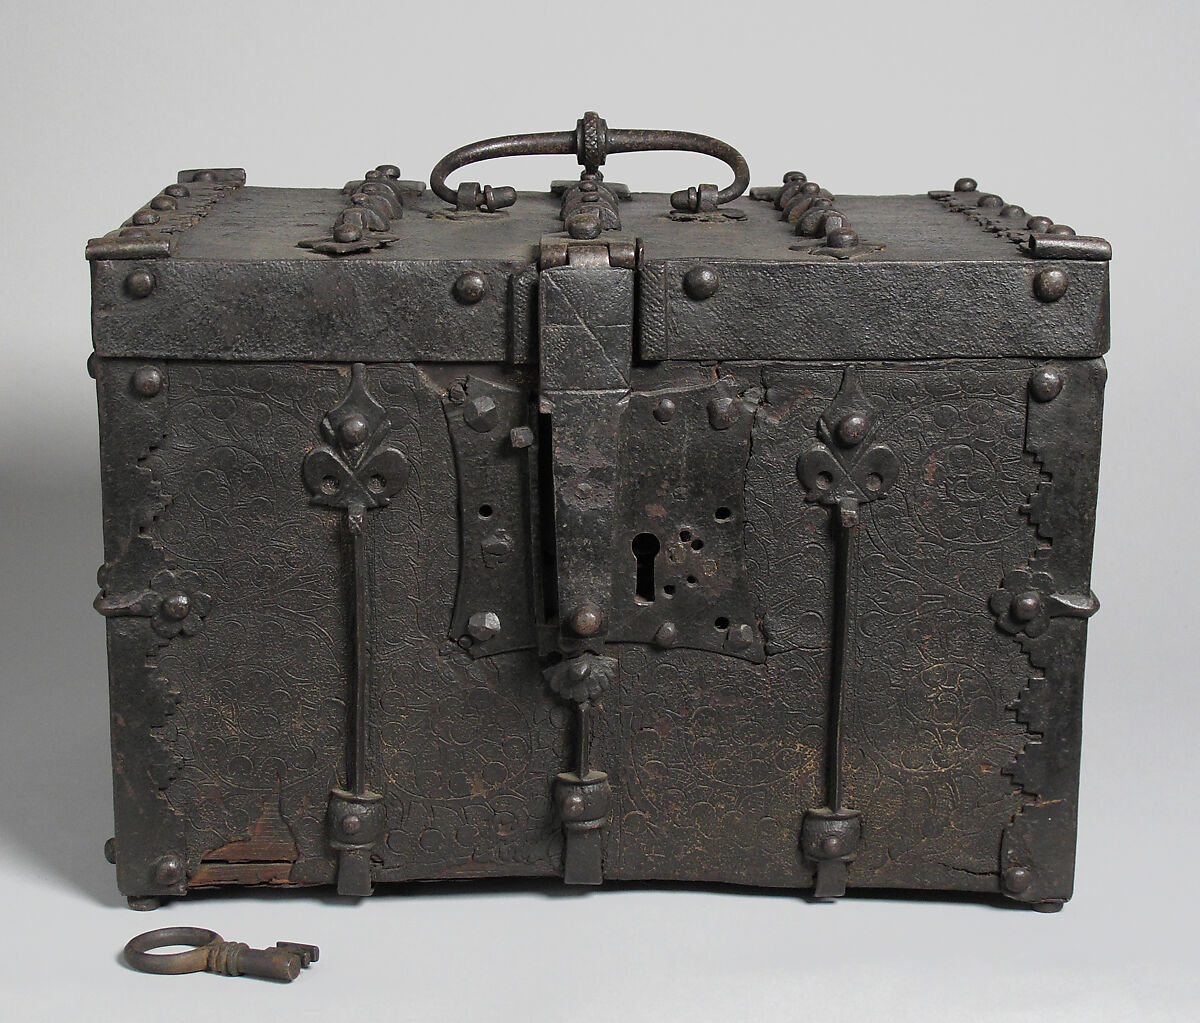 Box with Circular Scroll Designs, Leather (Cuir bouilli) with iron mounts, European 